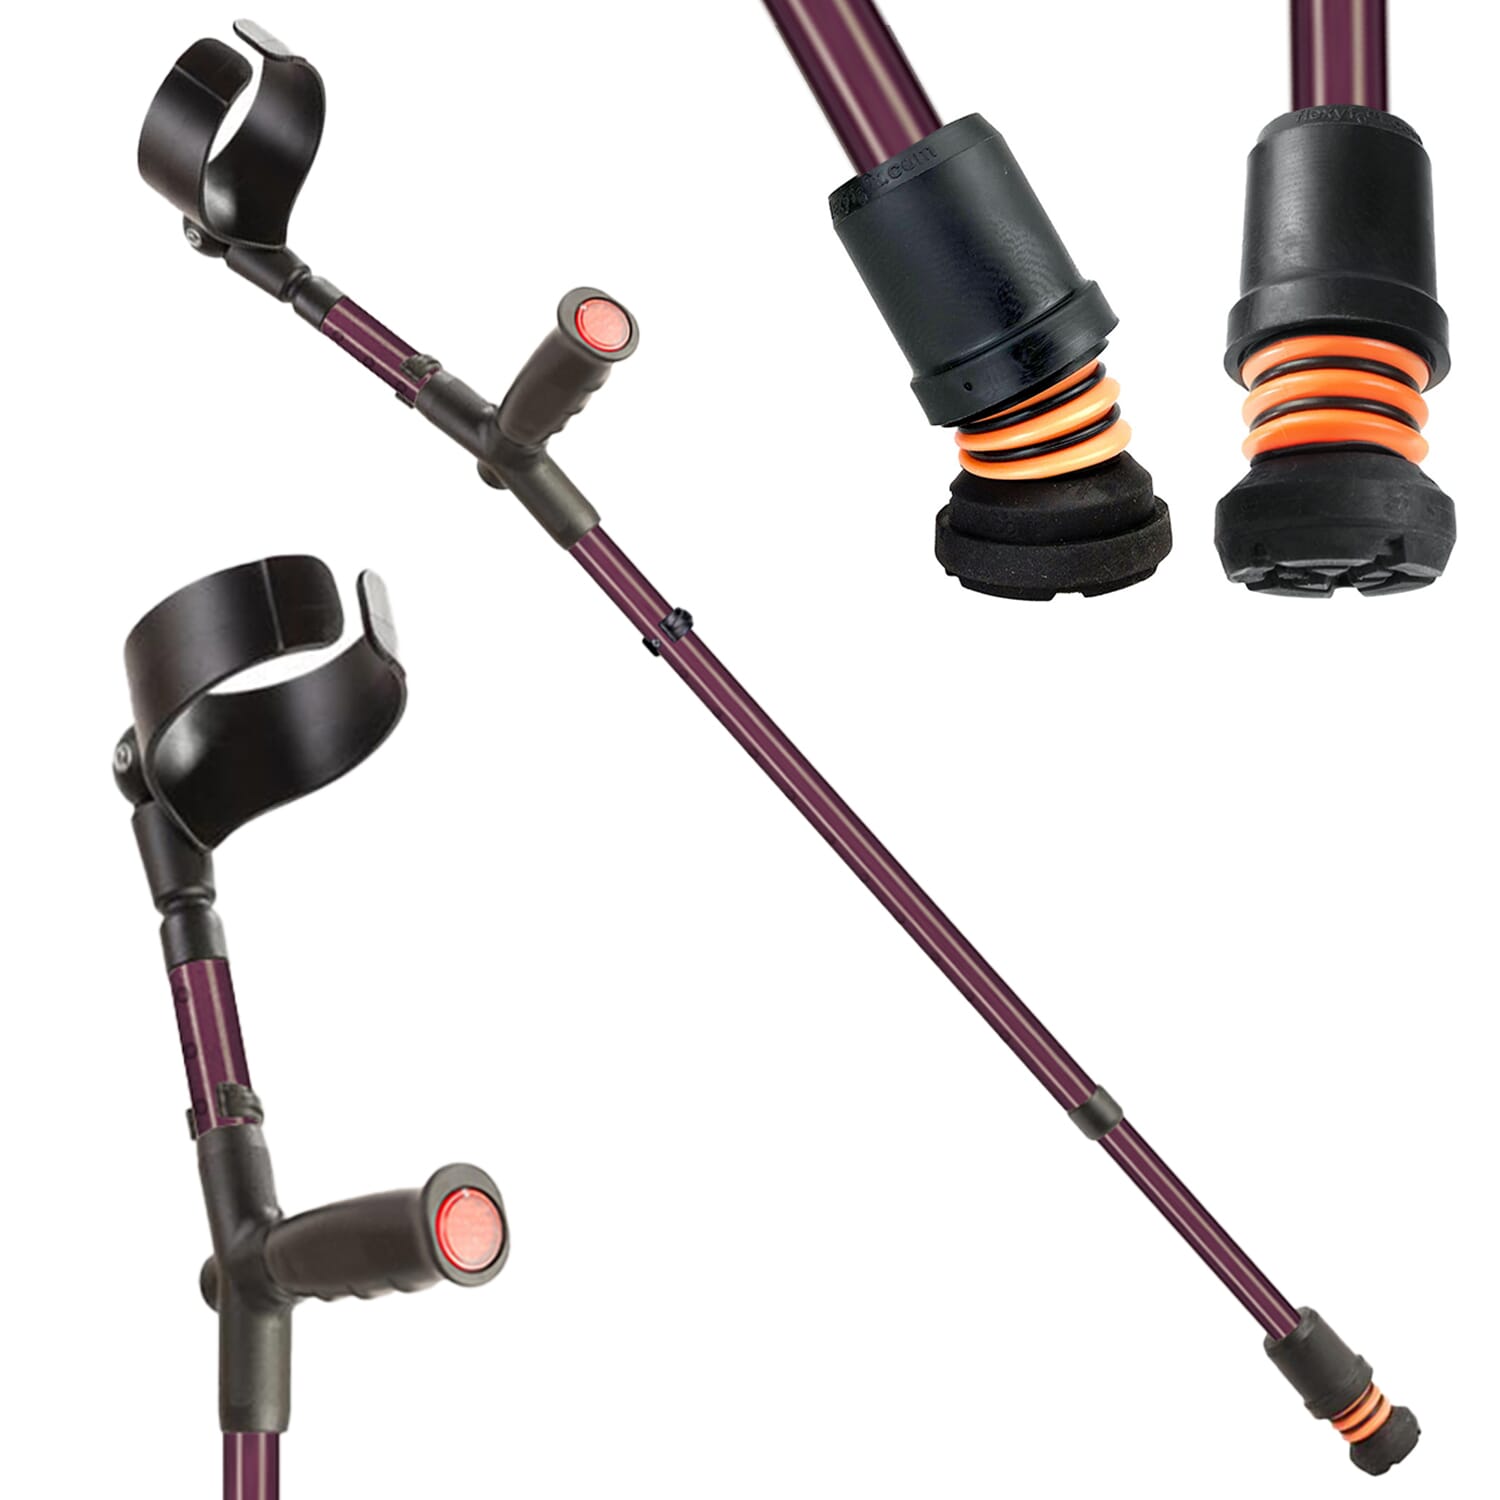 View Flexyfoot Soft Grip Double Adjustable Crutches Blackberry Single information